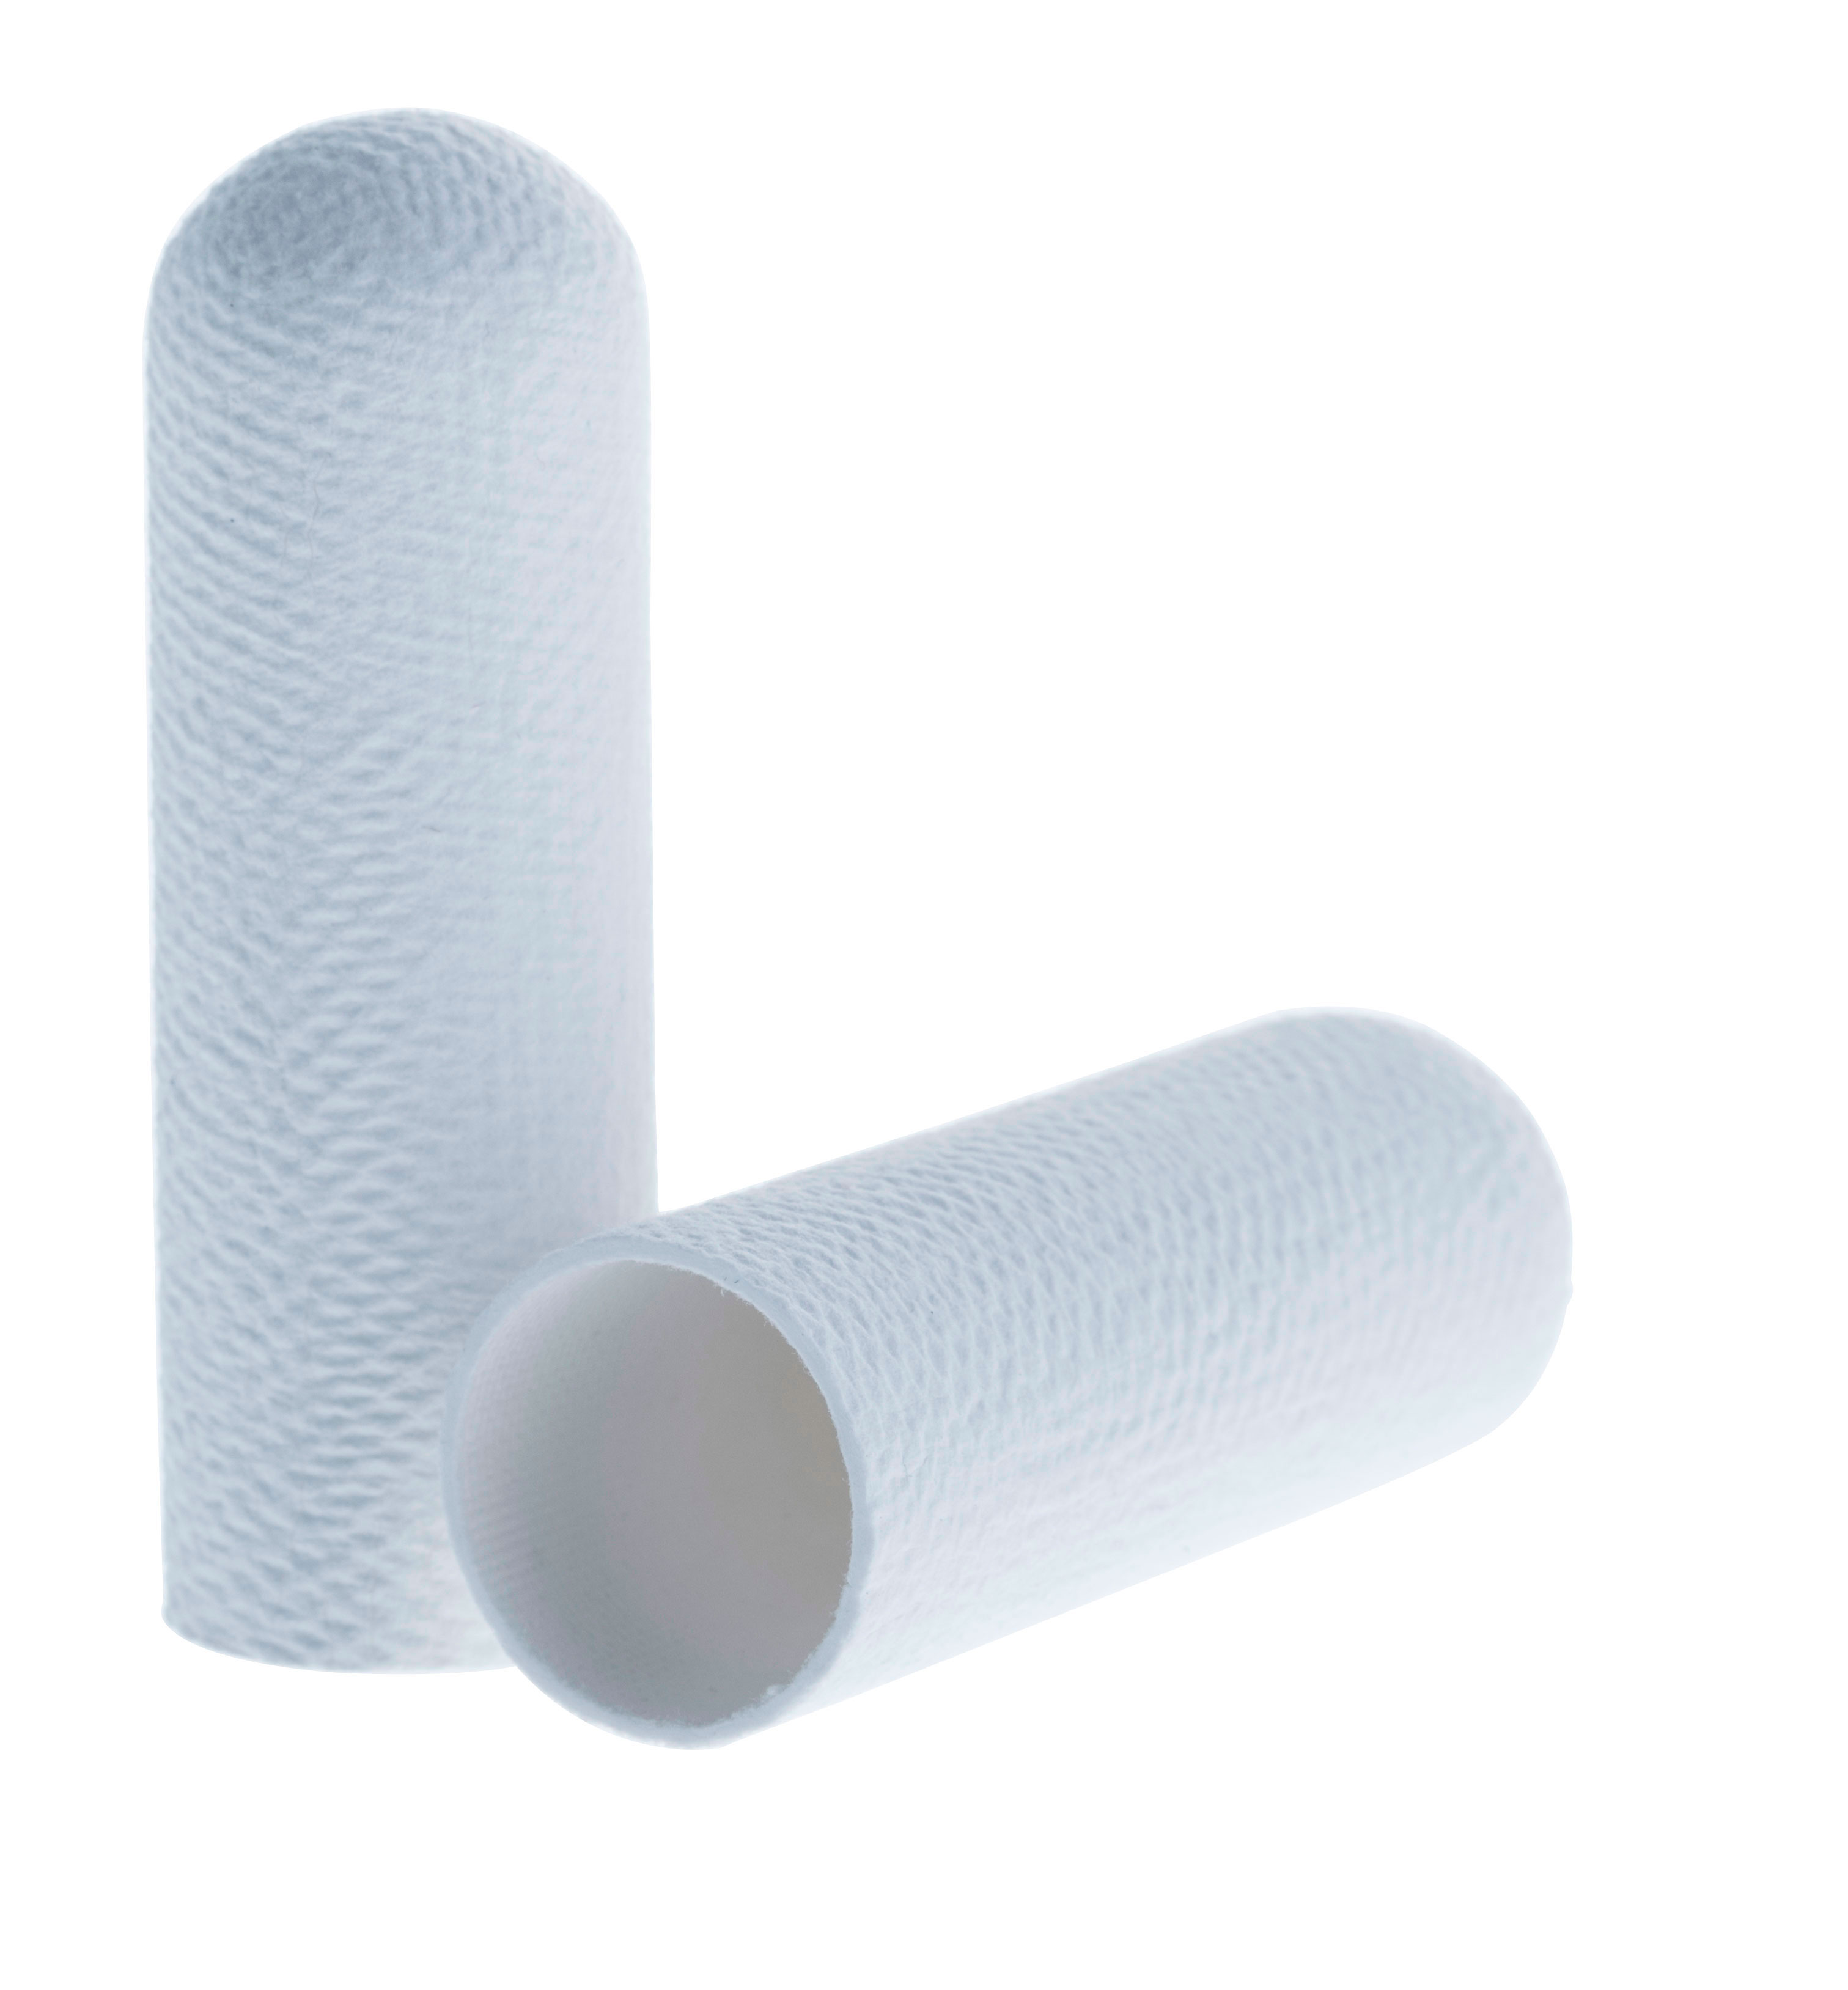 Cellulose extraction thimbles for Soxhlet extraction. SCHARLAU. Standard cellulose cartridge. Dim. Øxlength: 22x100mm. Particle retention in liquid: Nom. 8-15 microns